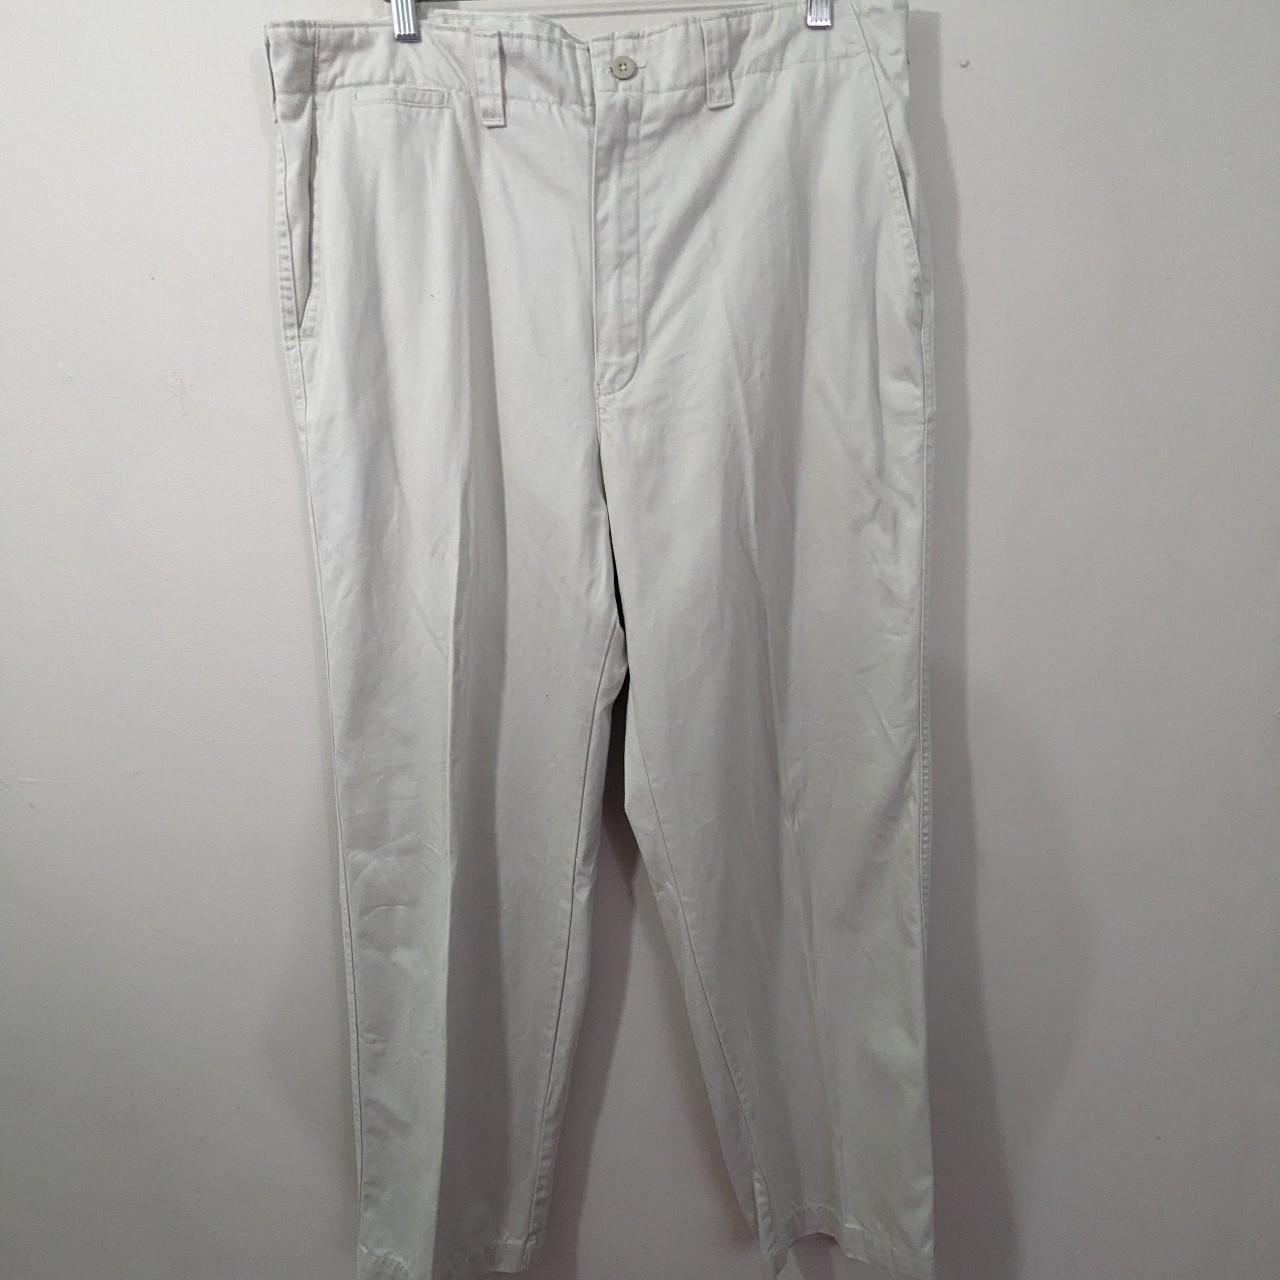 Vintage Stone Wash Chino / Men's Trousers - 40